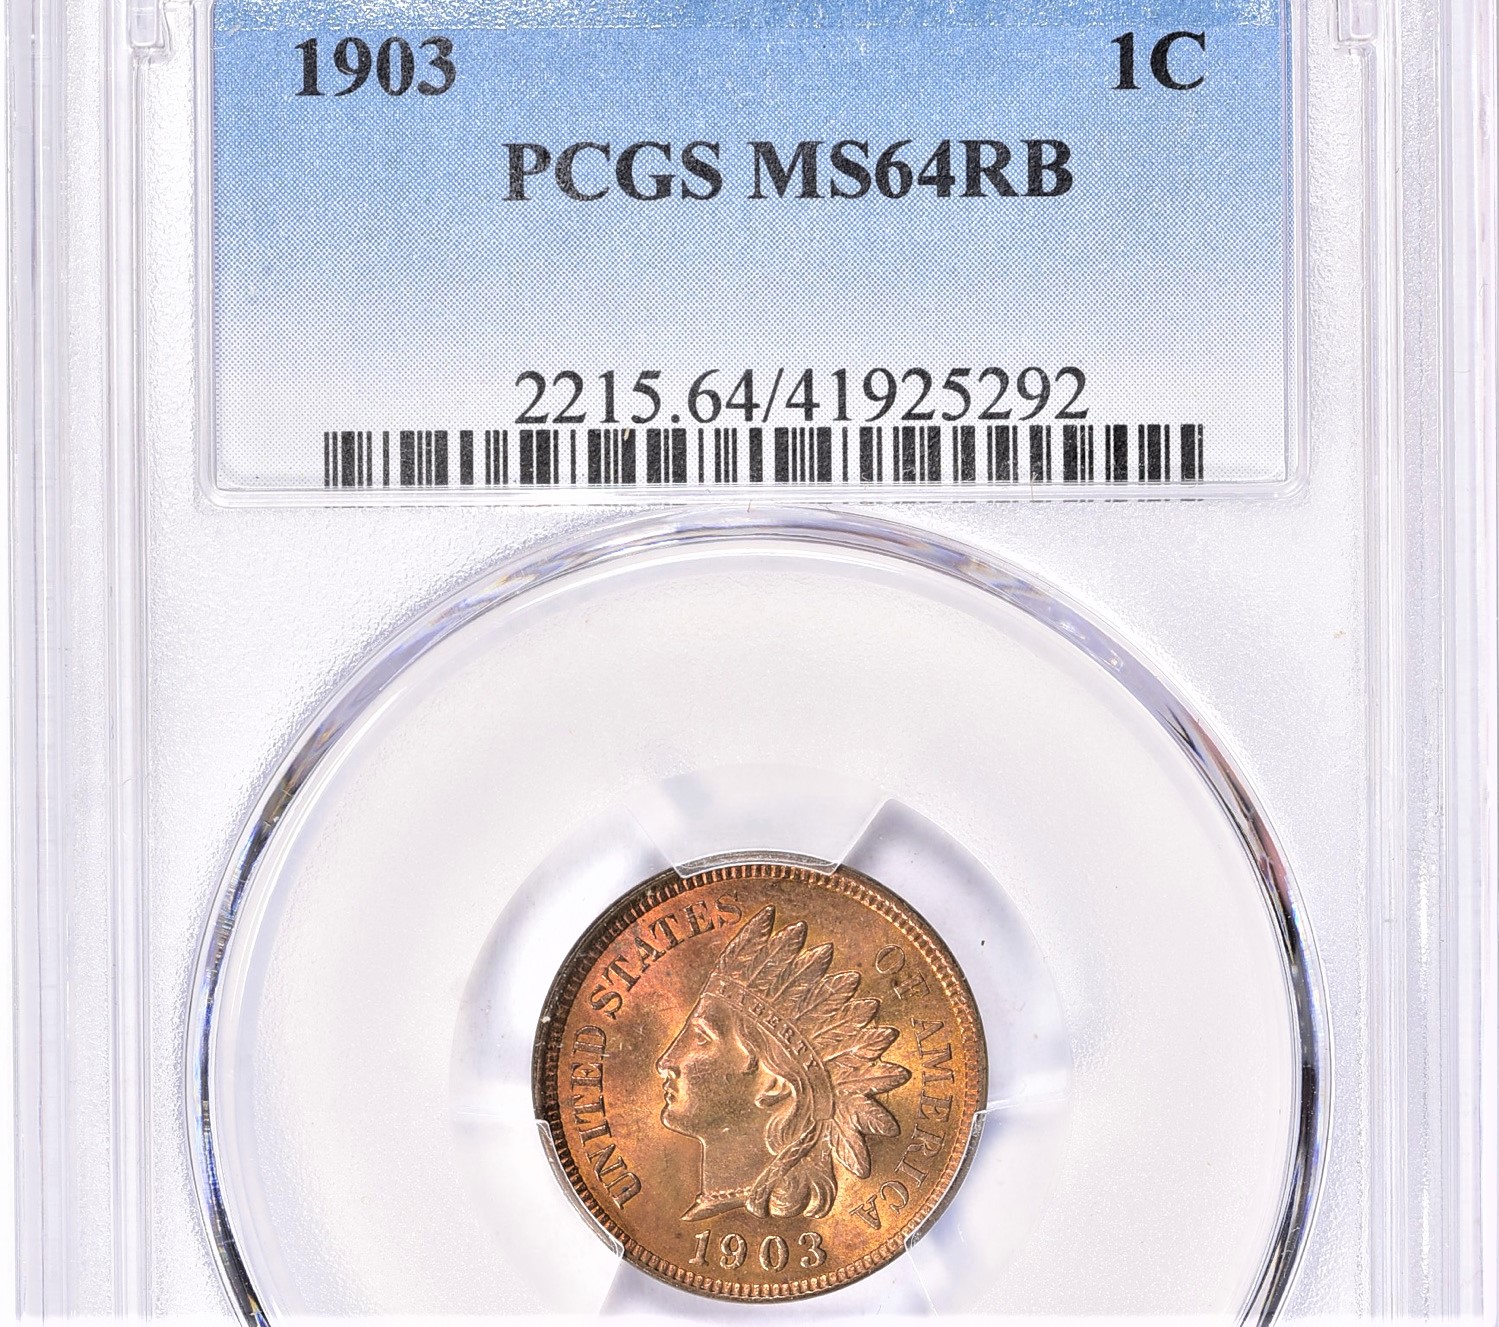 1983 1C Doubled Die Reverse Lincoln Memorial Cent PCGS MS66RD